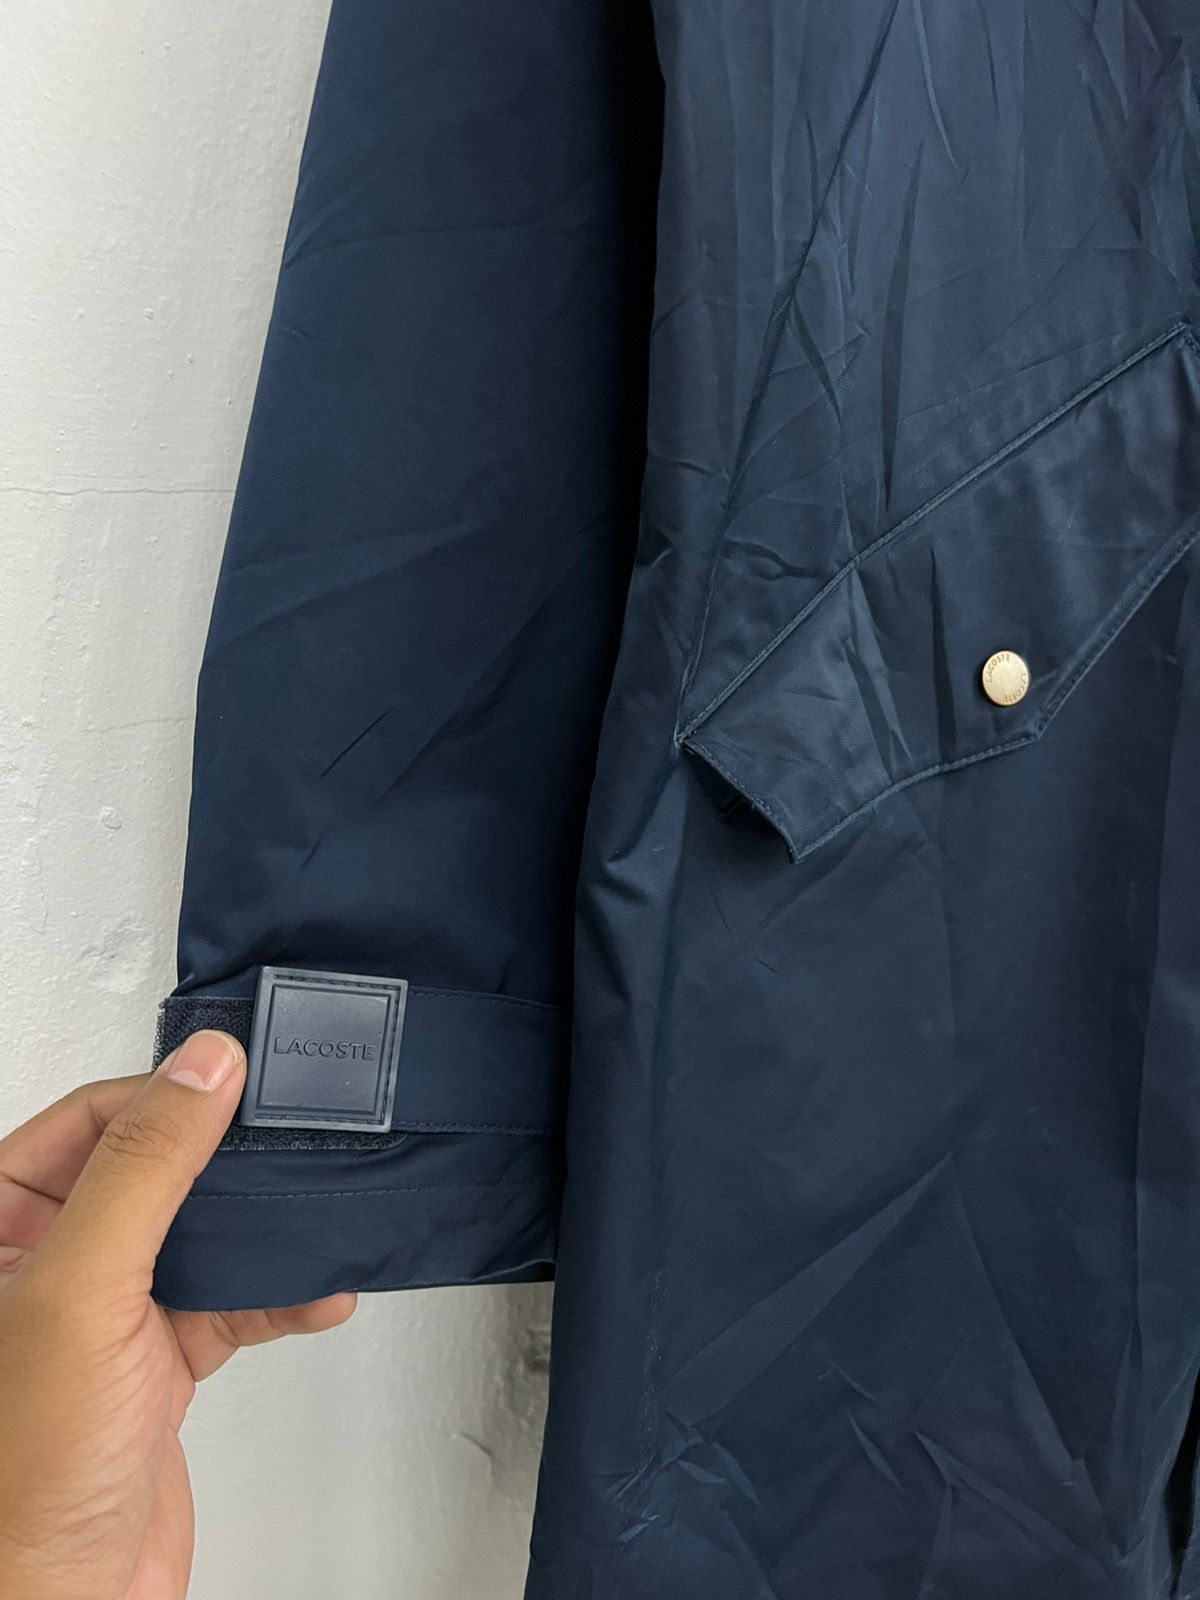 Lacoste Trench Coat - 8